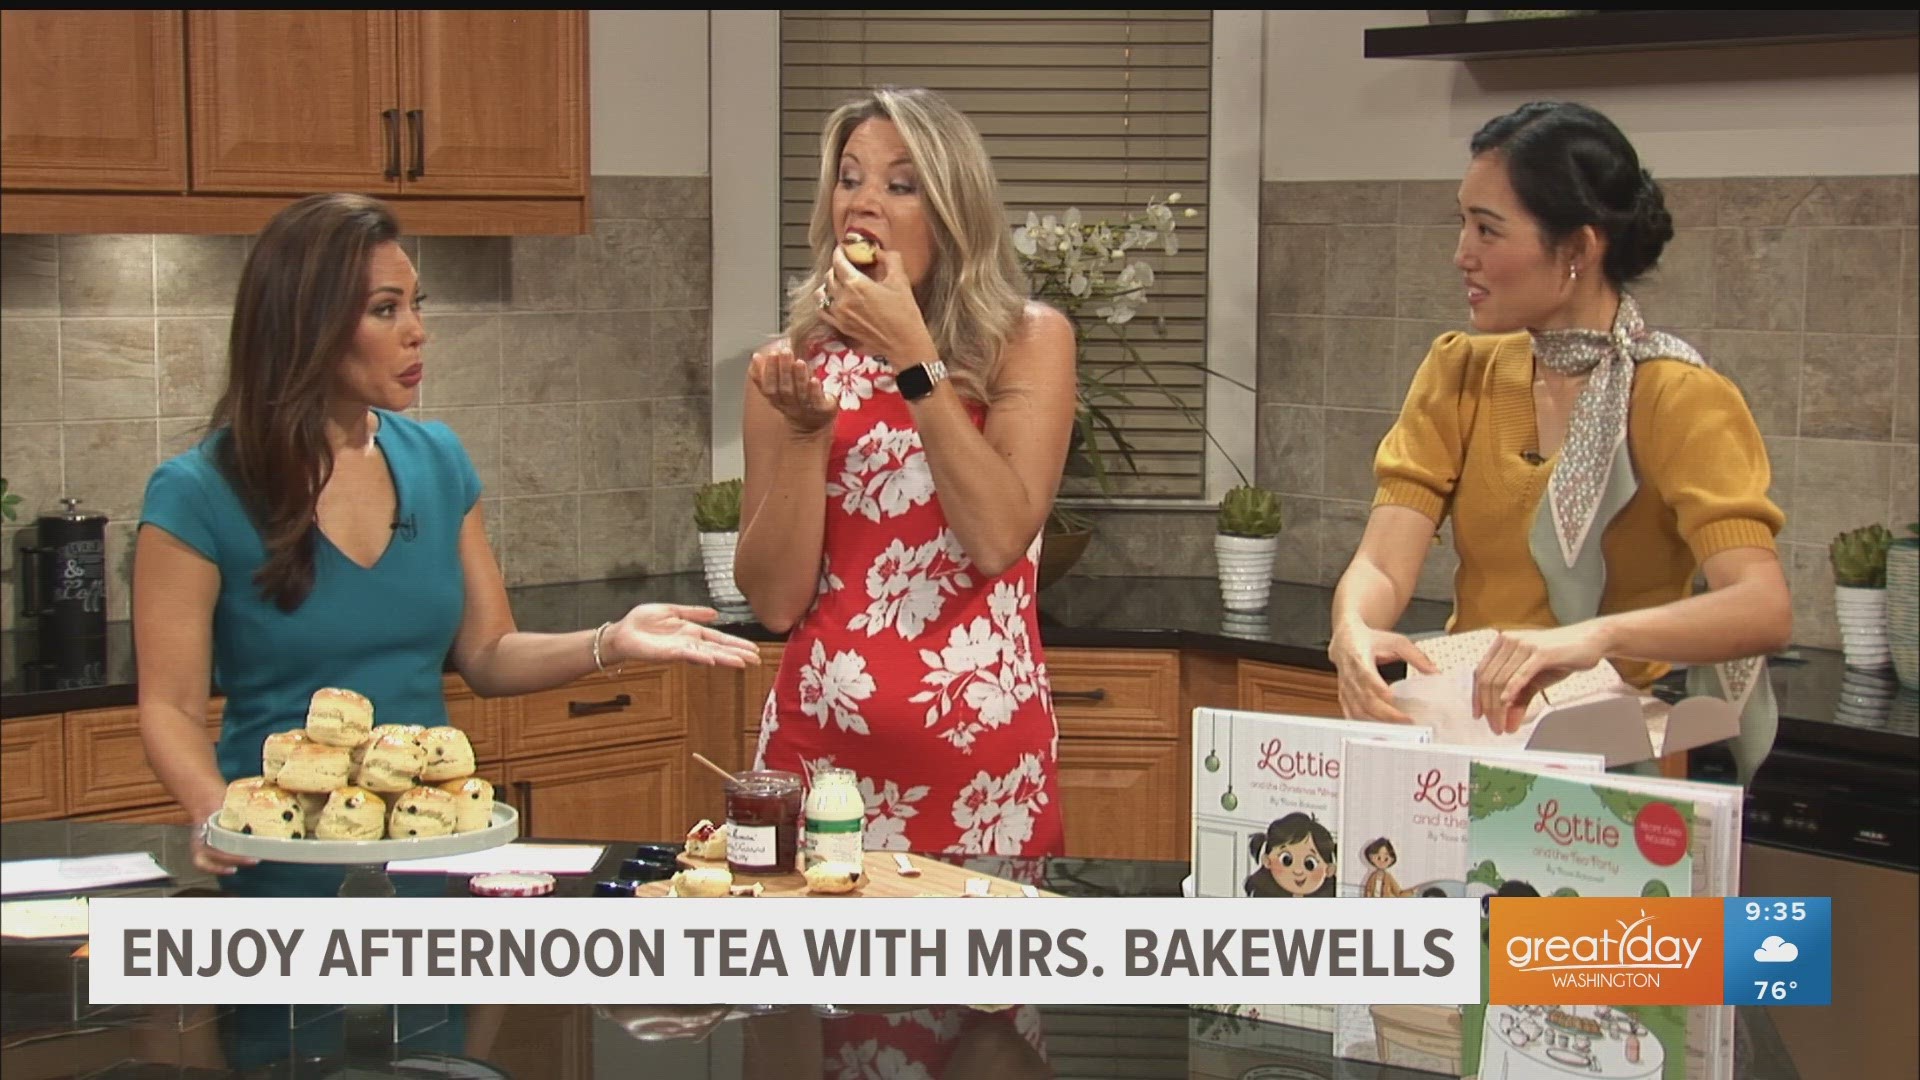 Founder and owner of Mrs. Bakewell's, Rose Bakewell visits the Great Day studios to share her cream tea boxes and gives samples of her famous scones.